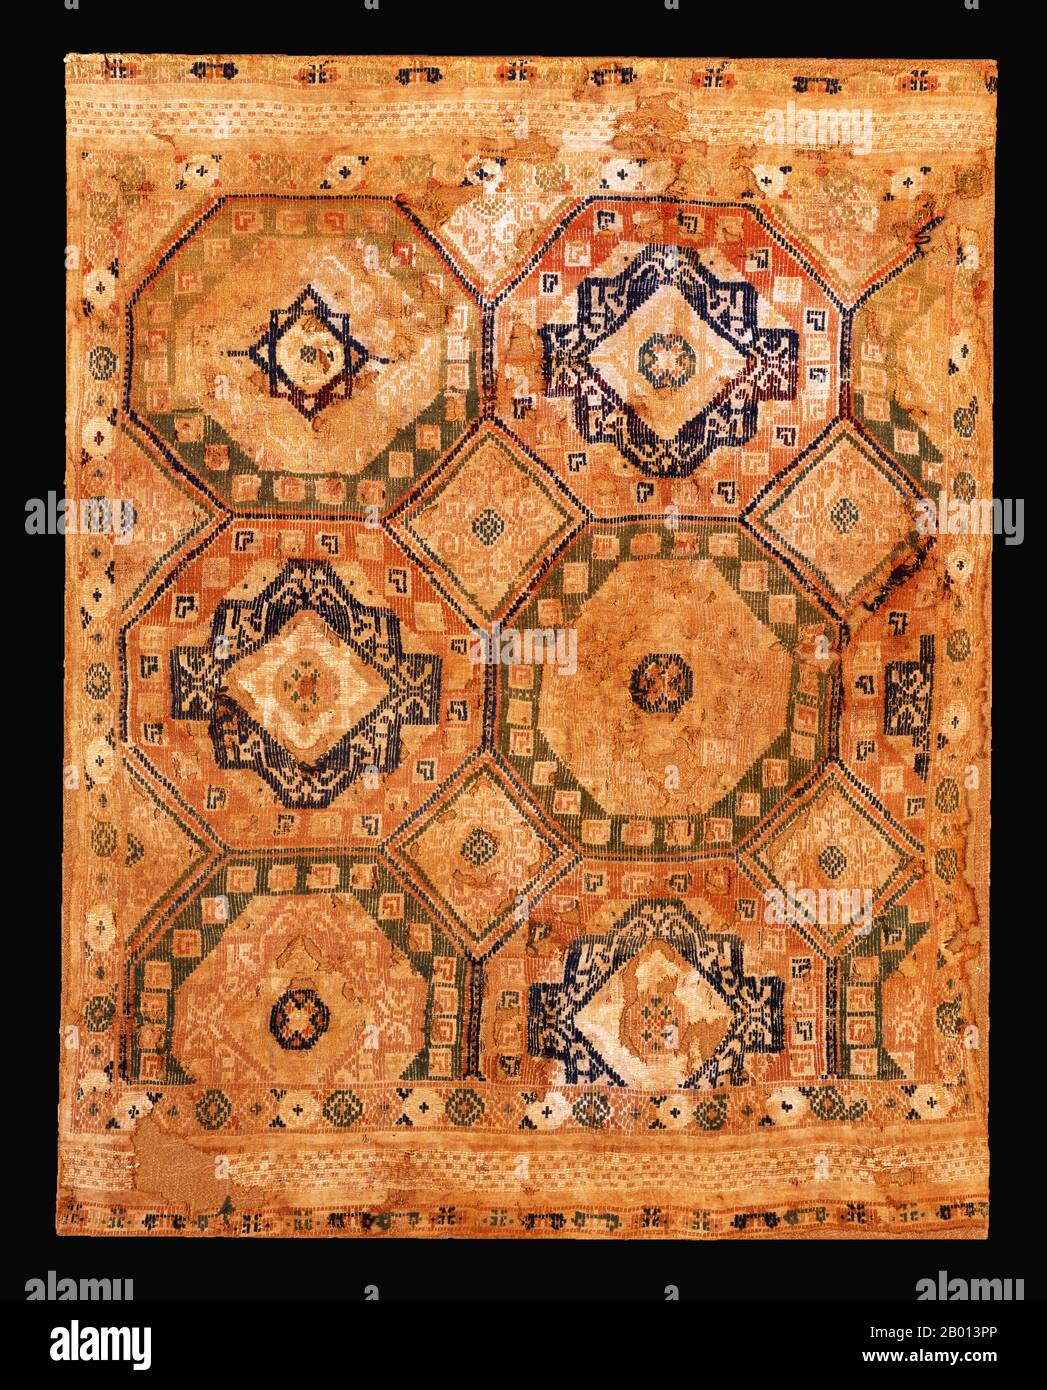 Egypt: Woven cloth with repeated medallion designs, Umayyad Caliphate, 7th-8th century.  The patterns, which form fairly simple geometrical shapes, are similar in design to the mosaic floors found in the Umayyad desert palaces of Jordan and Palestine. Stock Photo